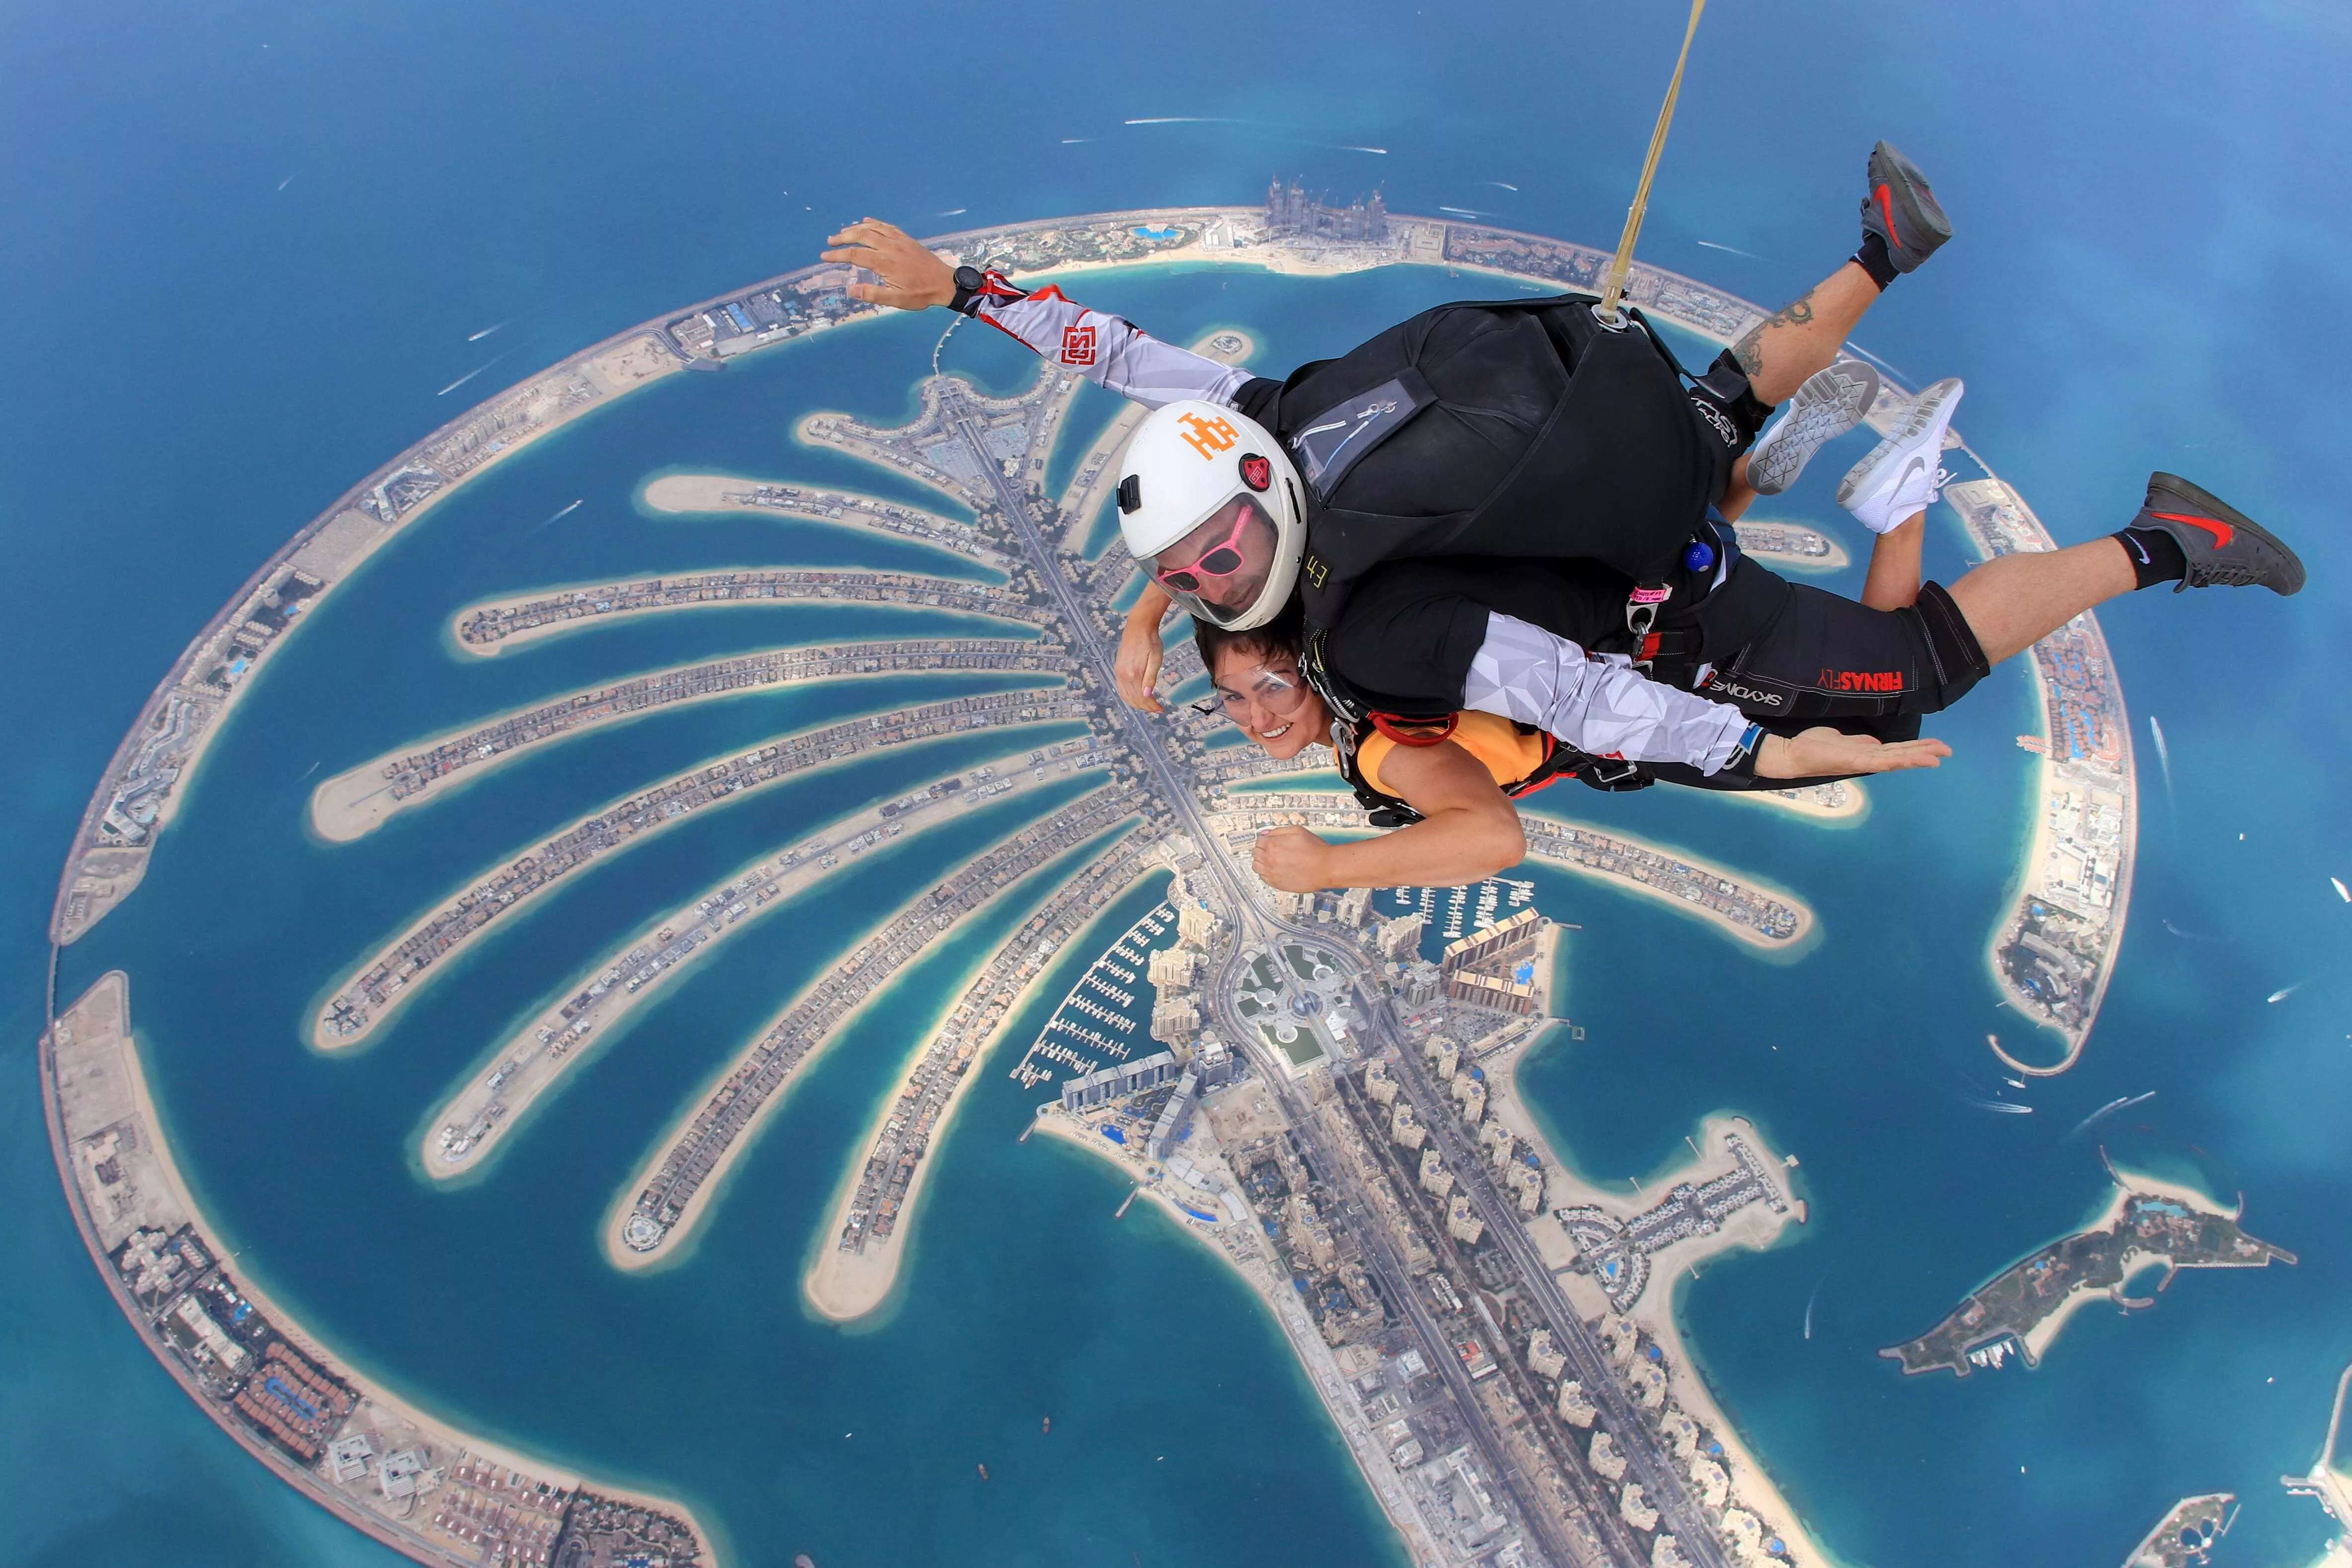 Skydive Dubai in United Arab Emirates, Middle East | Skydiving - Rated 9.8